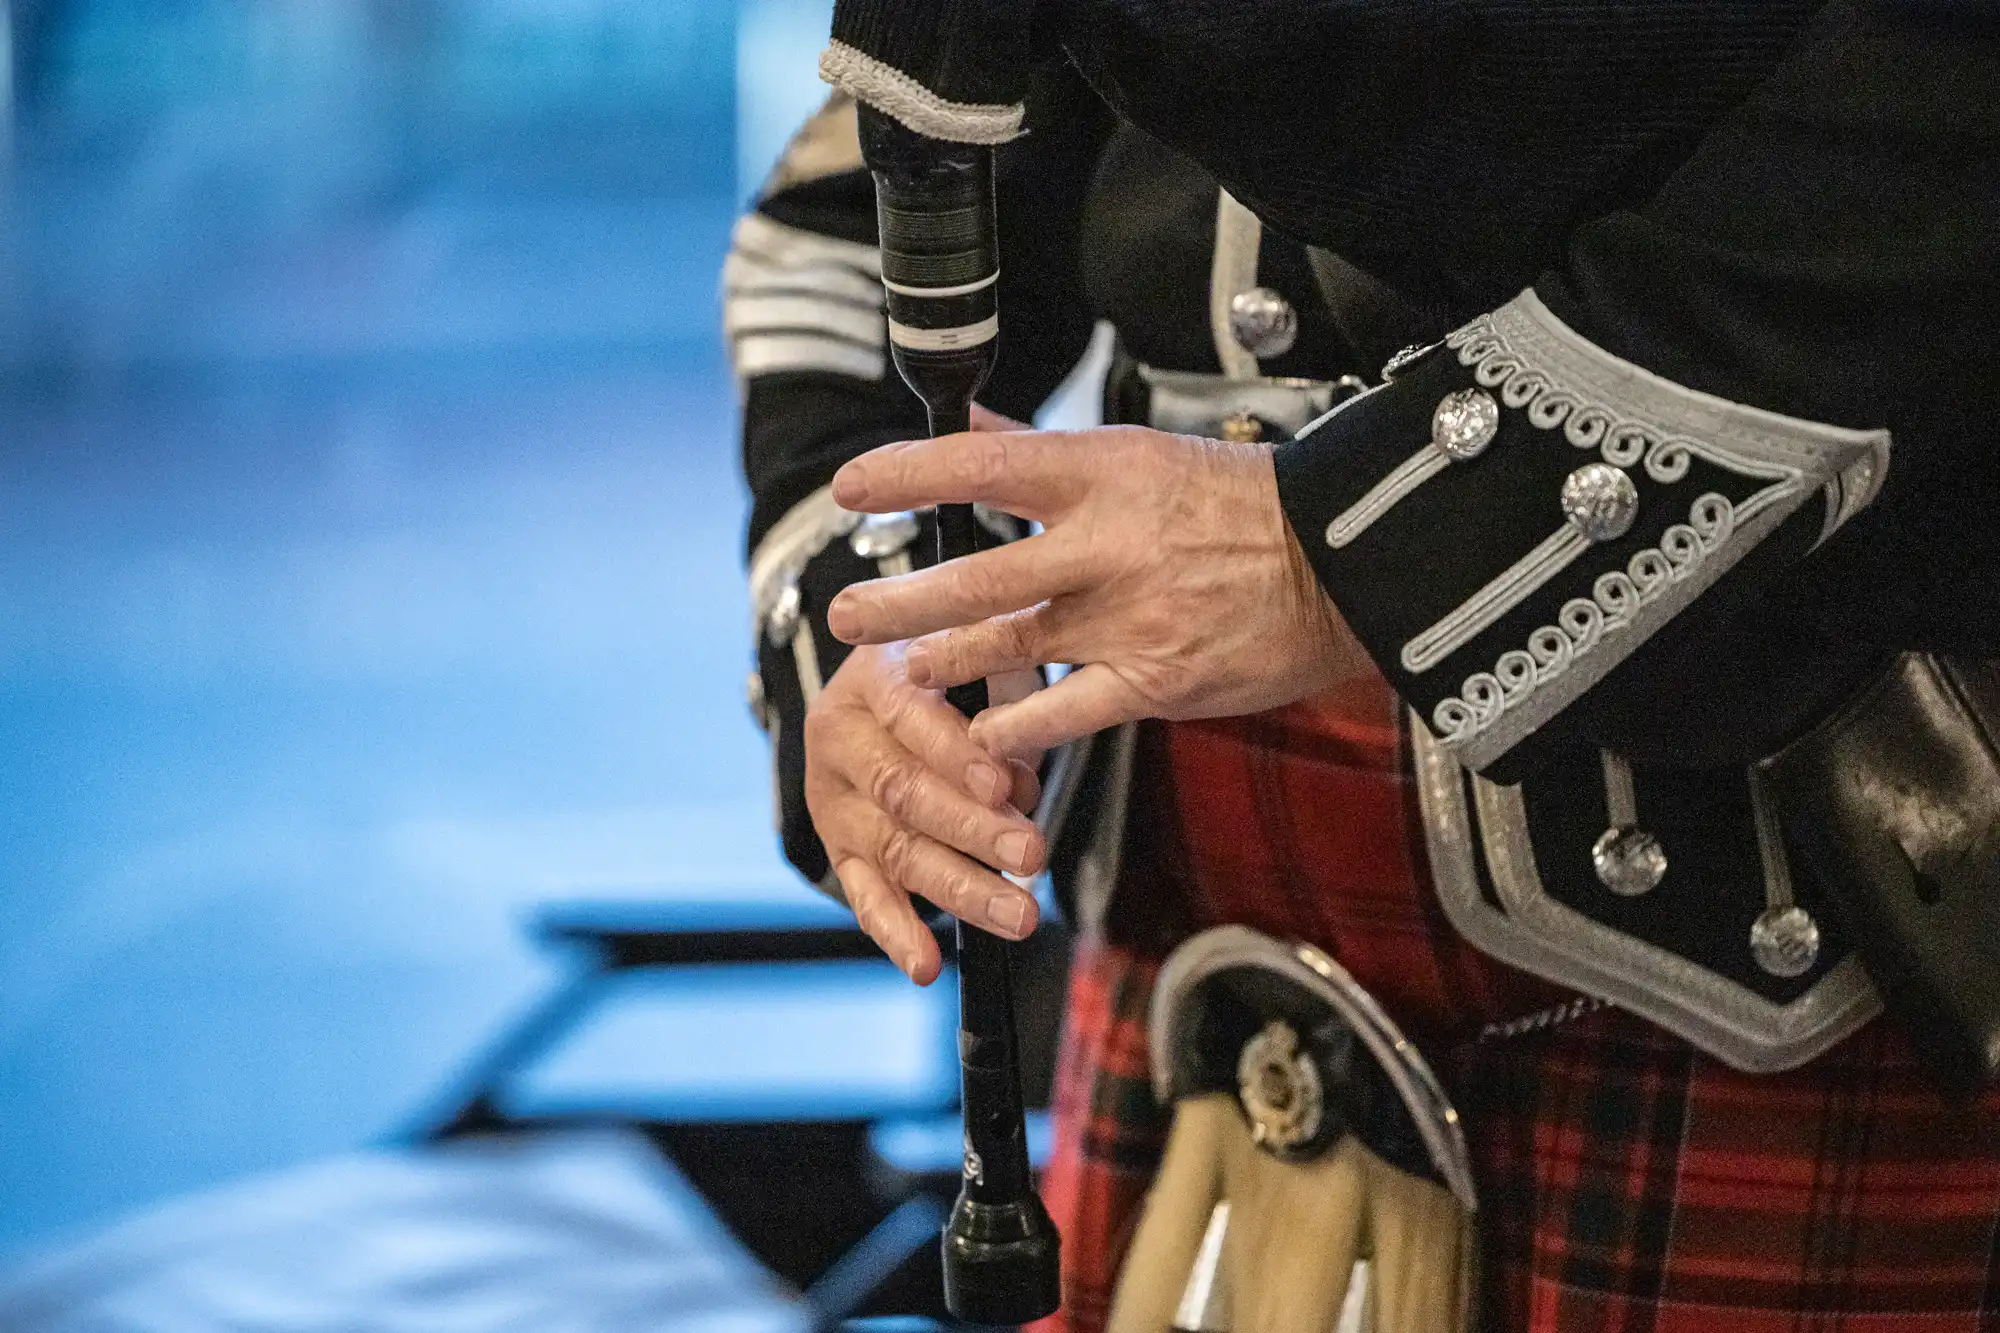 Close-up of a person in traditional Scottish attire playing the bagpipes, focusing on their hands and the instrument's chanter.